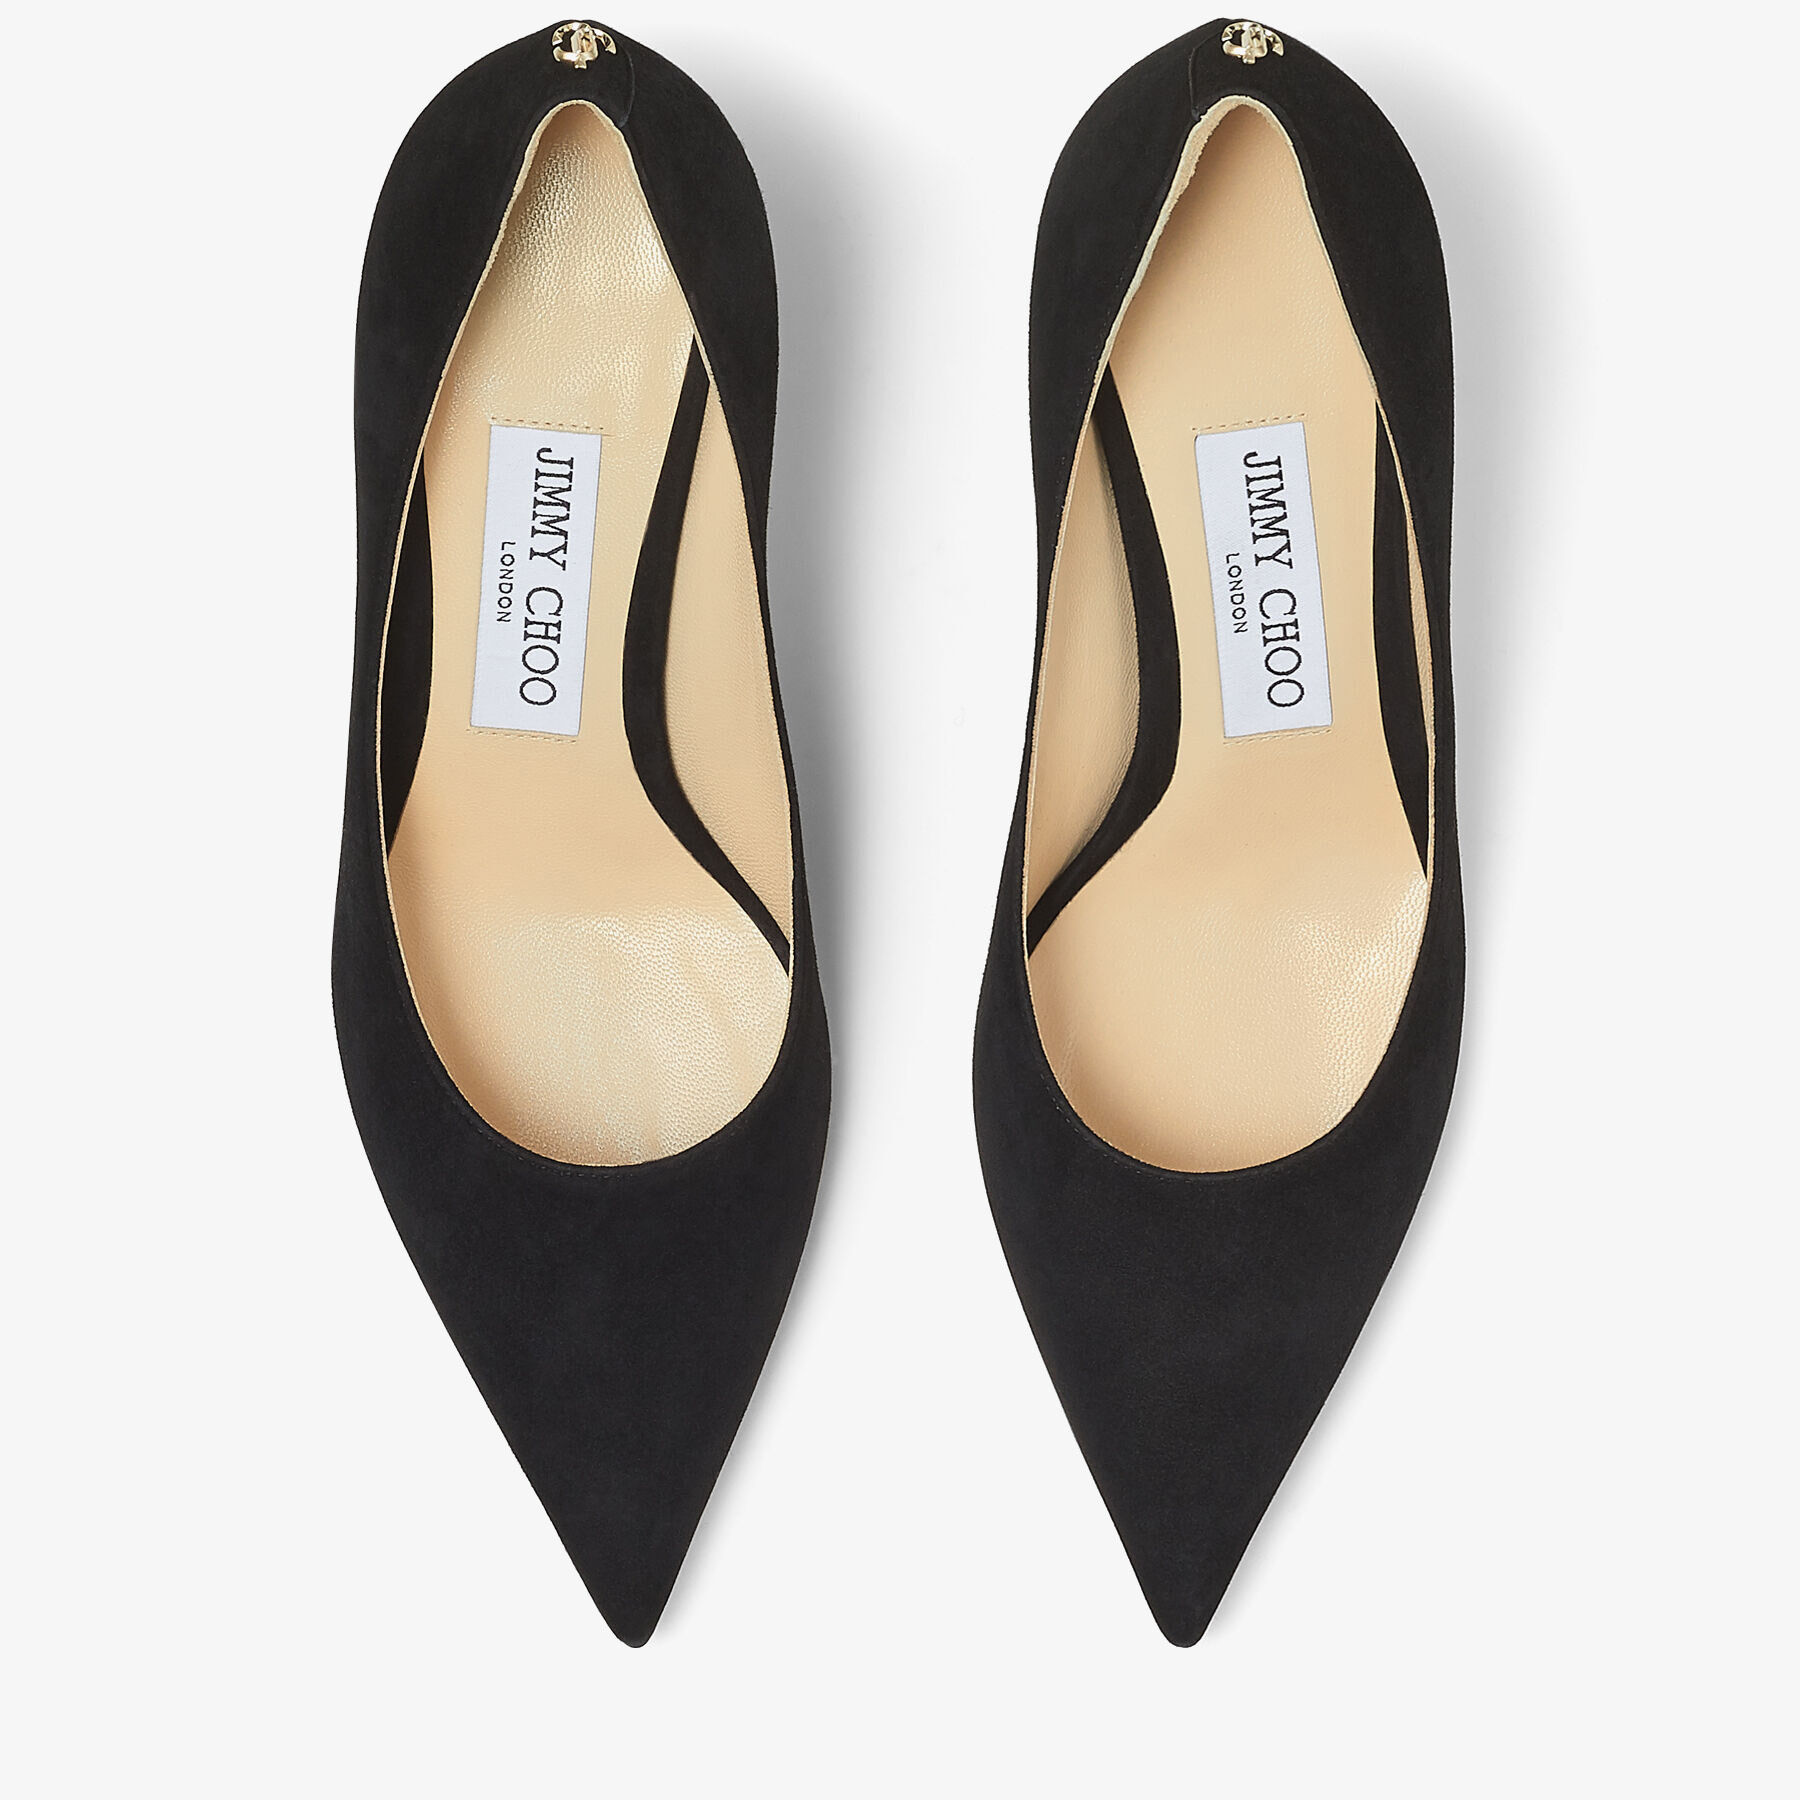 Black Suede Pointed pumps with JC Emblem | LOVE 65 | 24:7 Icons